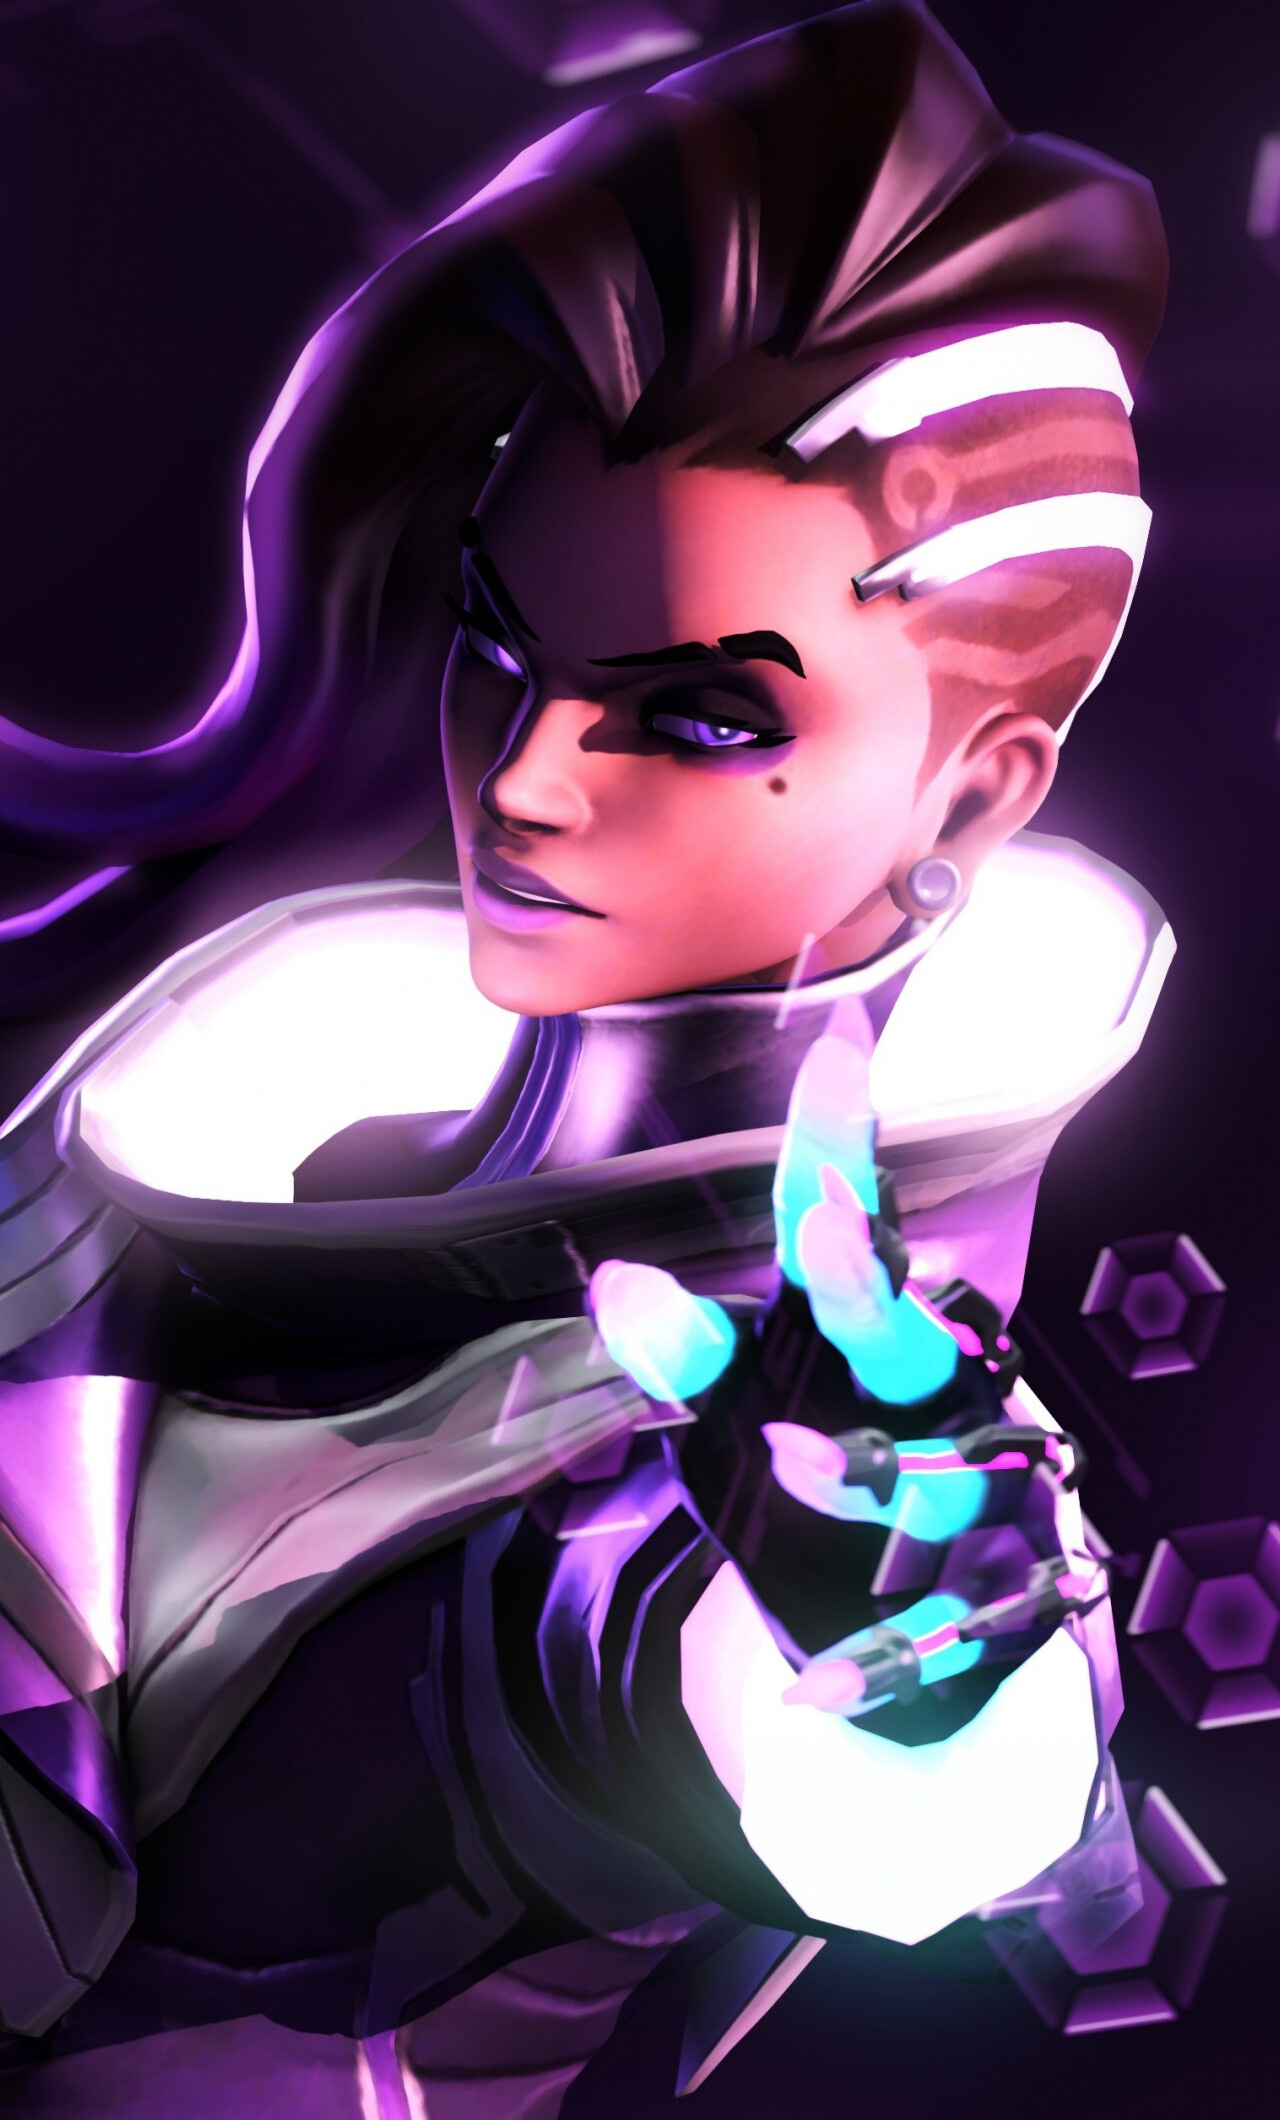 Overwatch: Sombra, Olivia Colomar, A Mexican hacker and infiltrator. 1280x2120 HD Background.